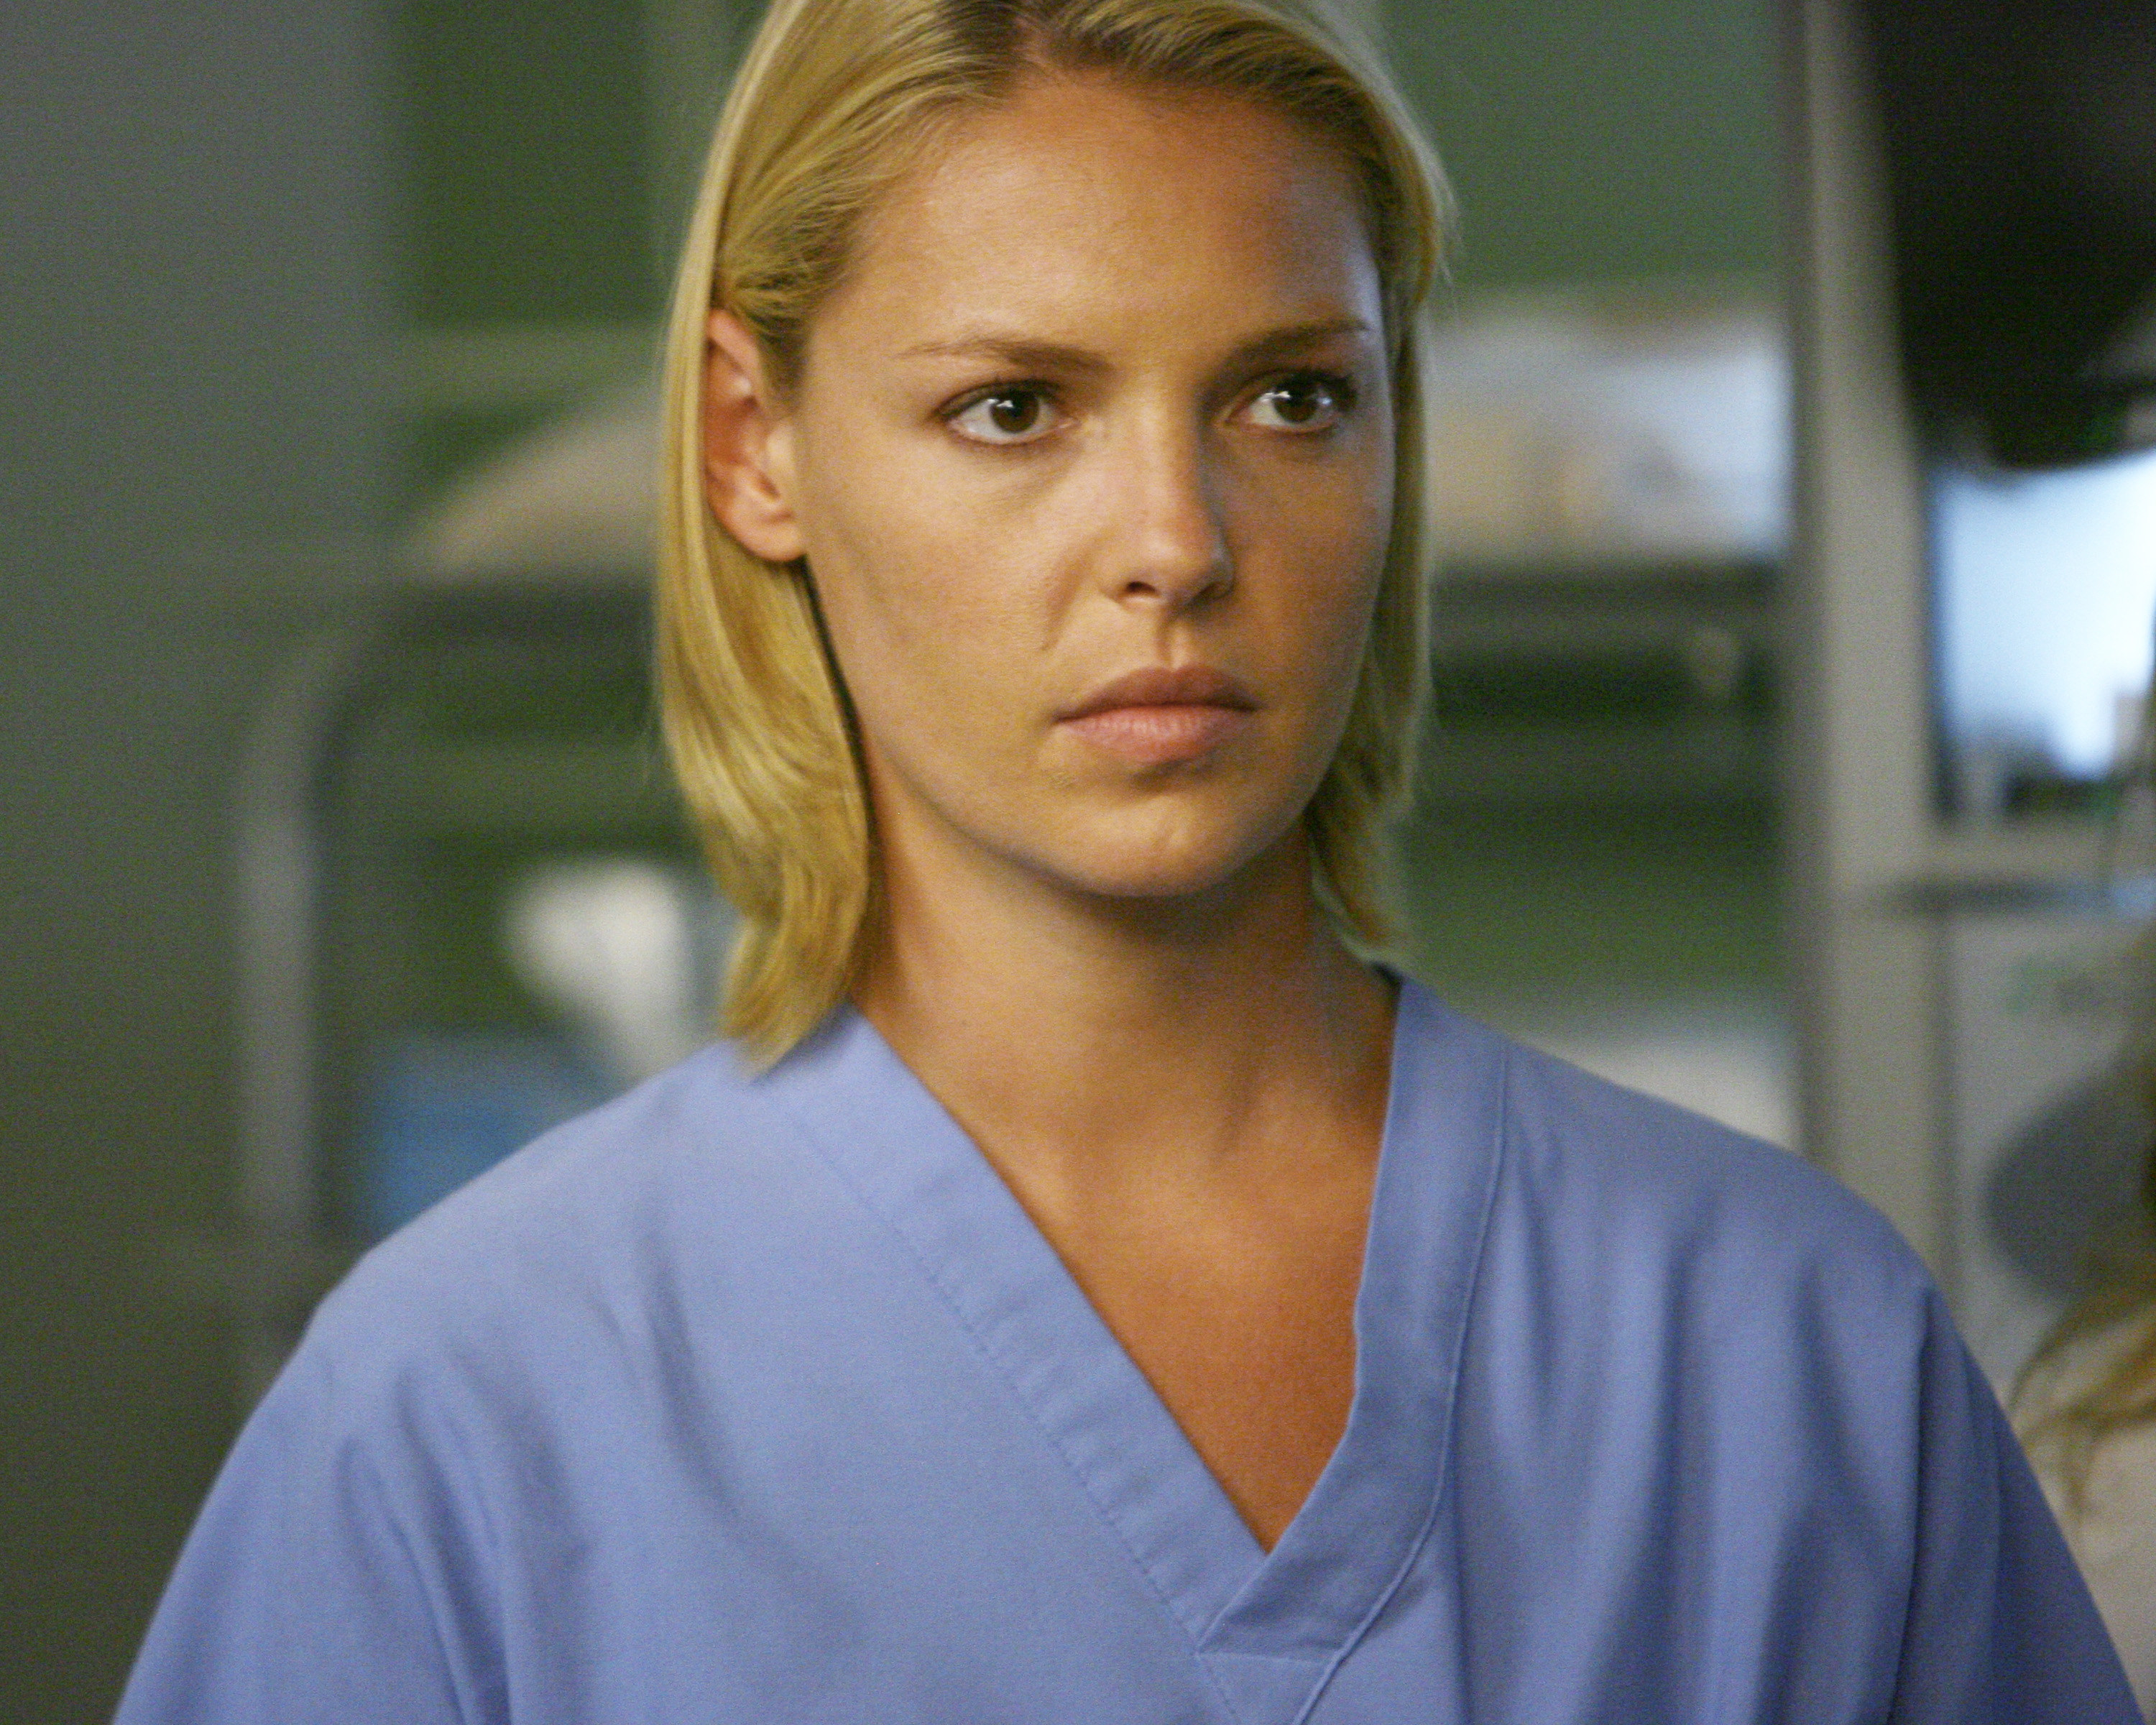 Heigl looks concerned while wearing scrubs